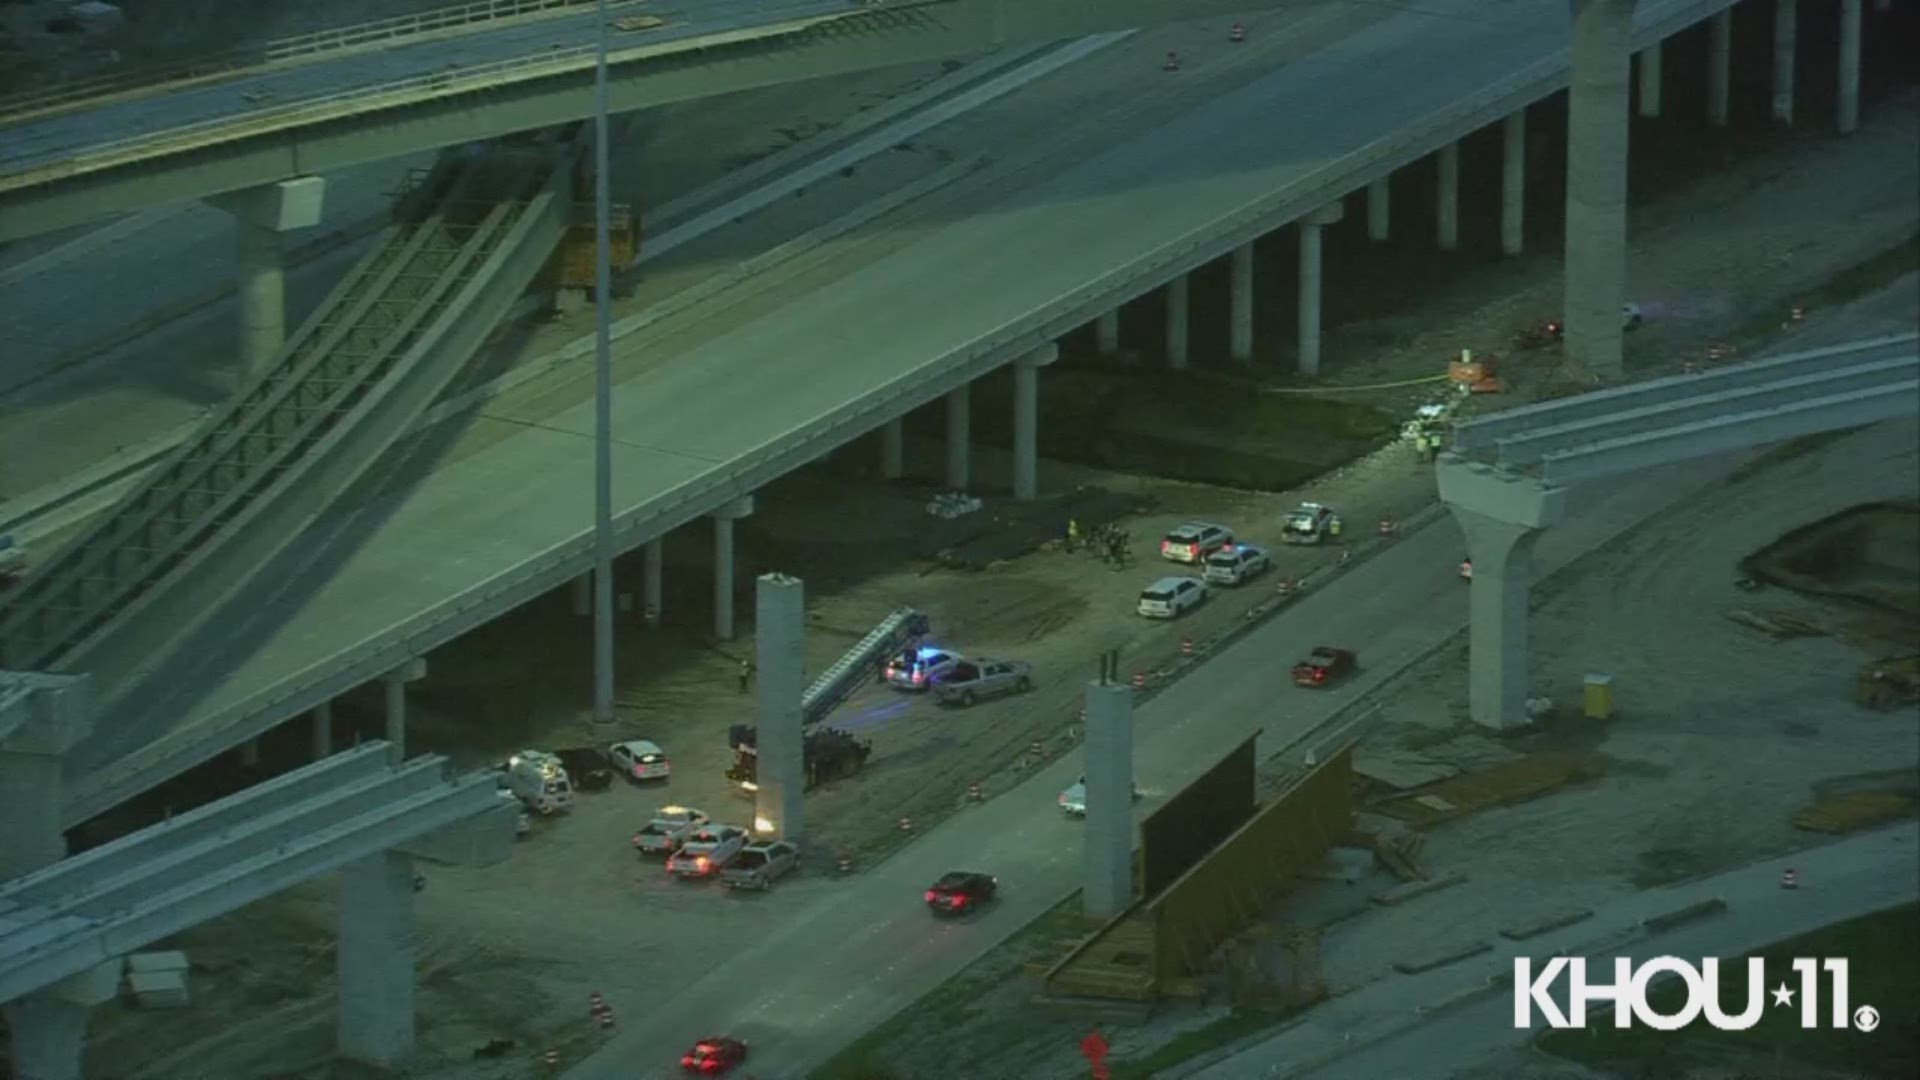 A construction worker died after he fell from the Beltway 8 overpass near Highway 288 early Friday.